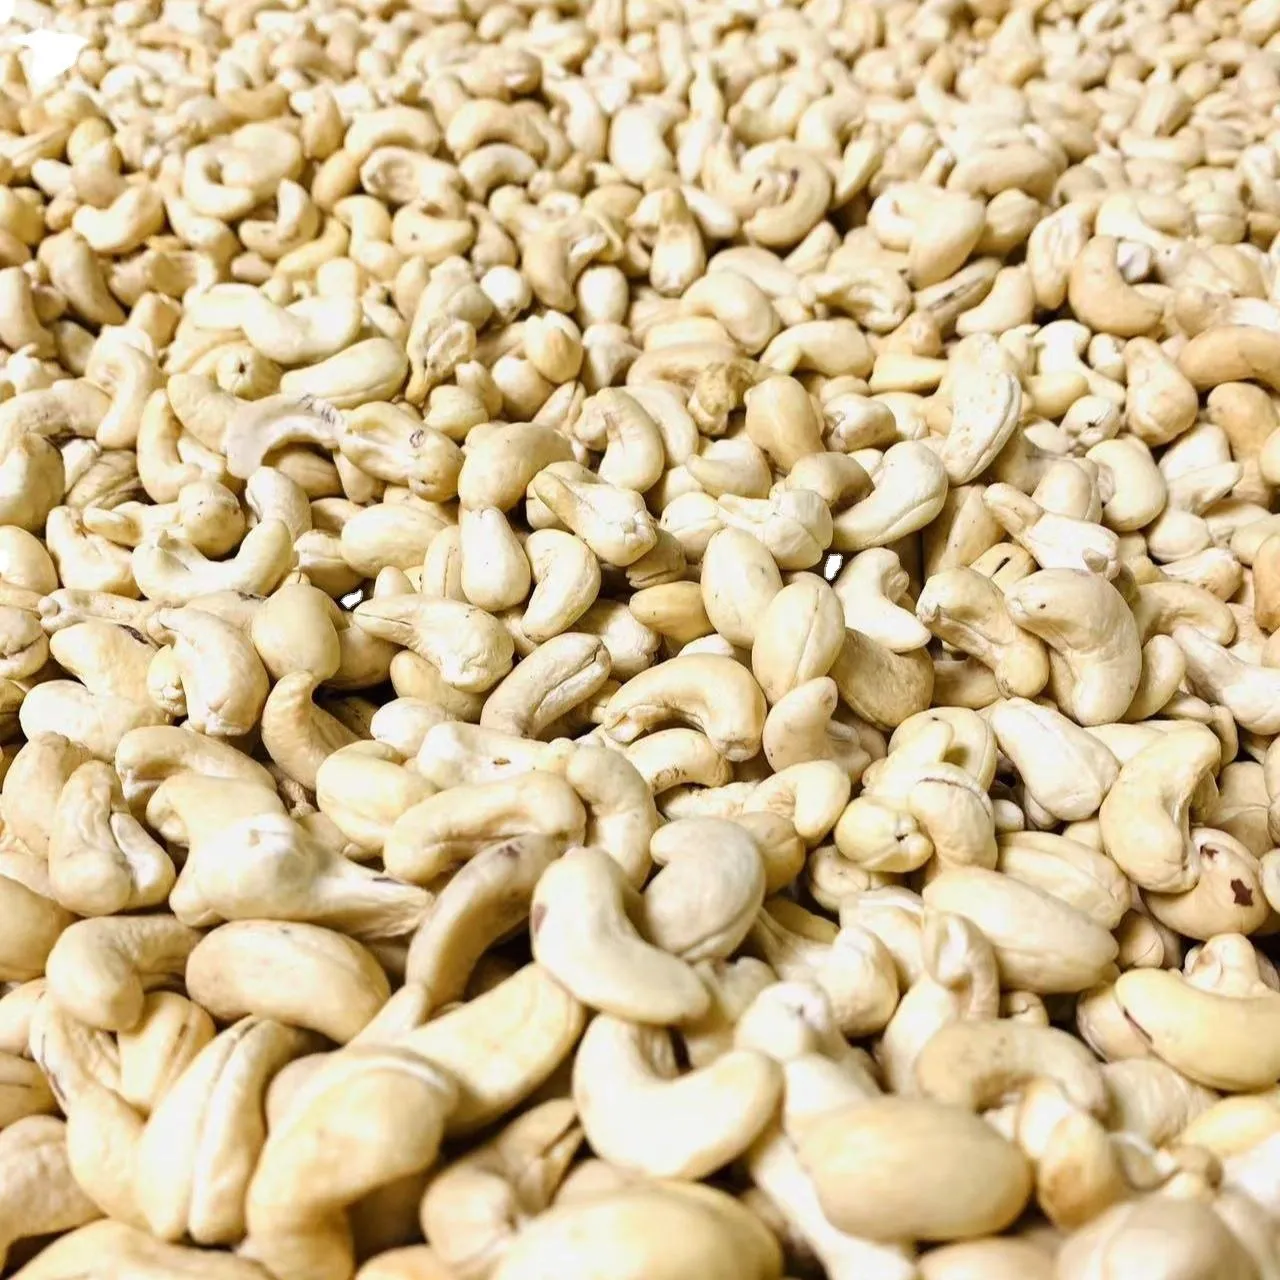 Buy cashew nut industry in Odisha at an exceptional price